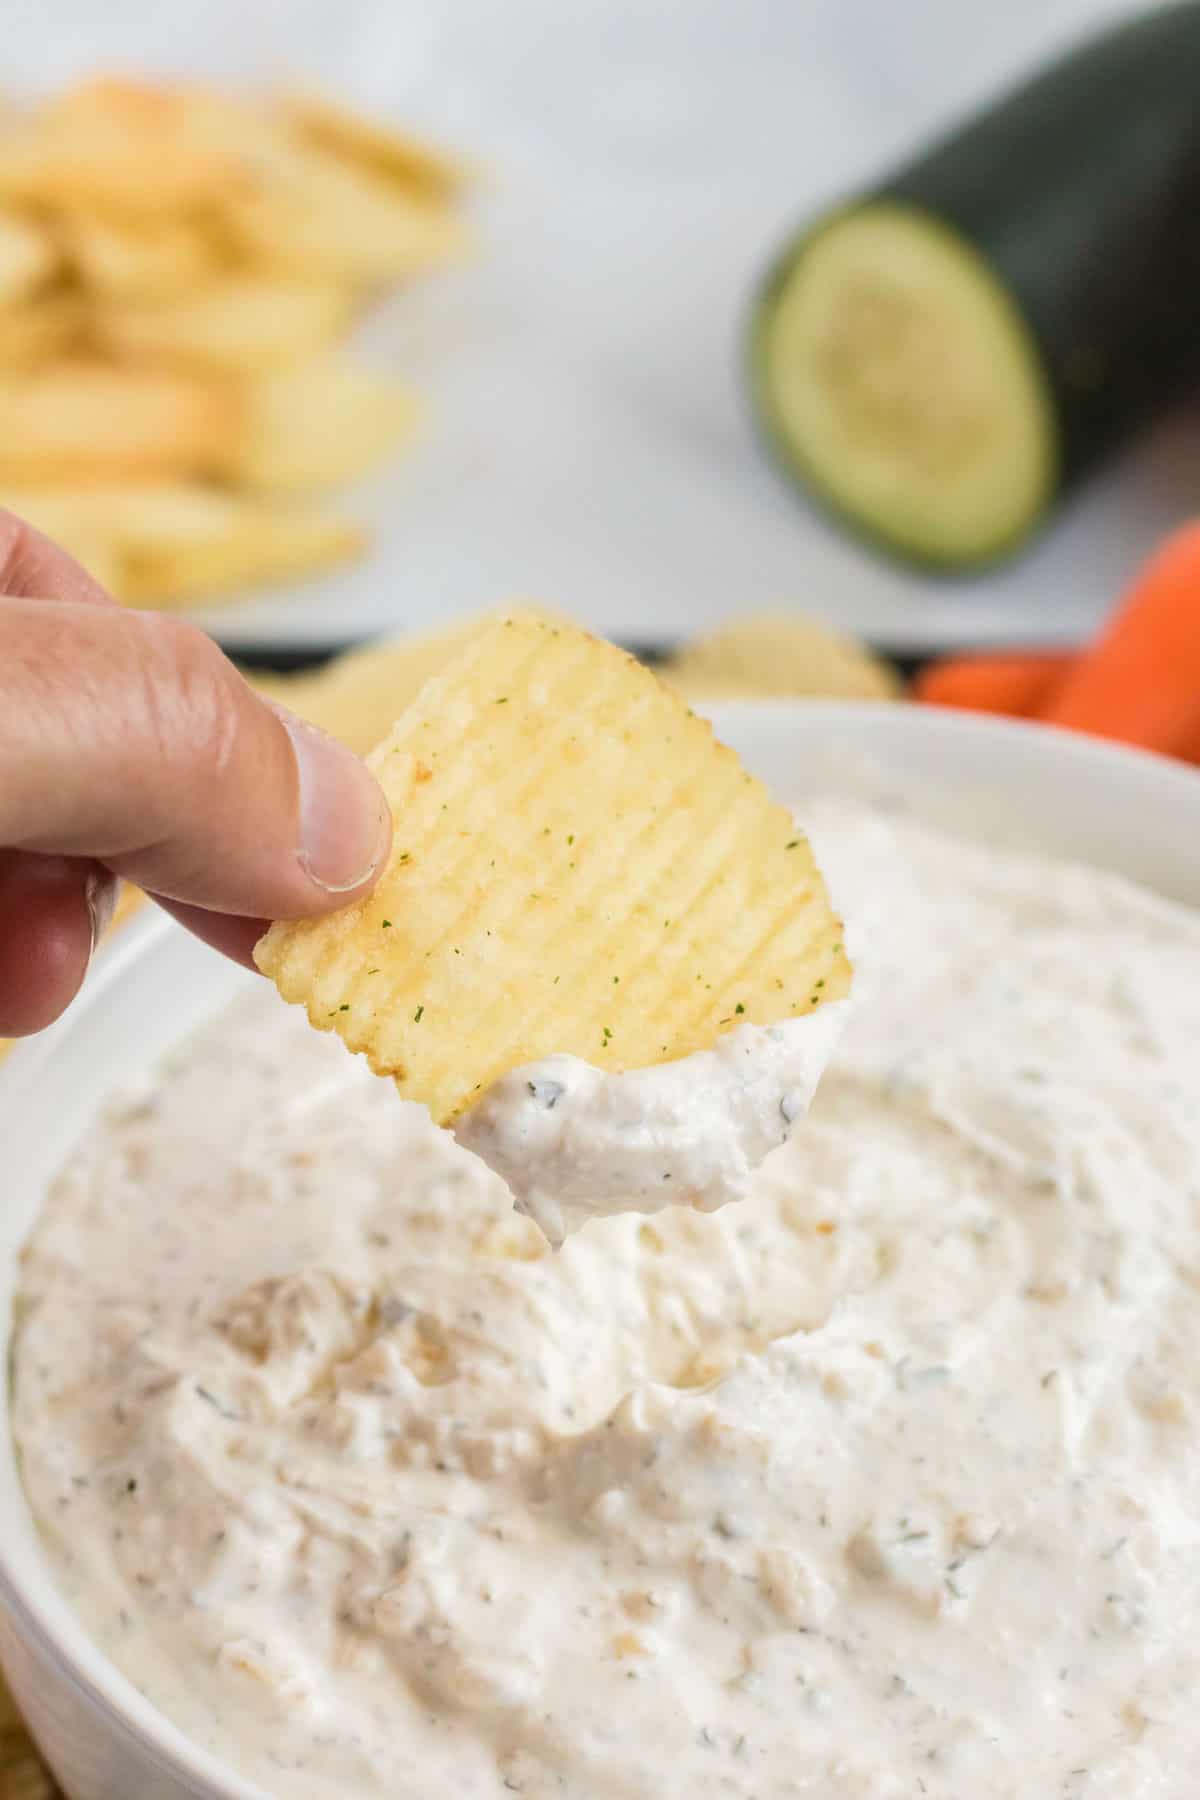 ruffle chip being dipped into chip dip